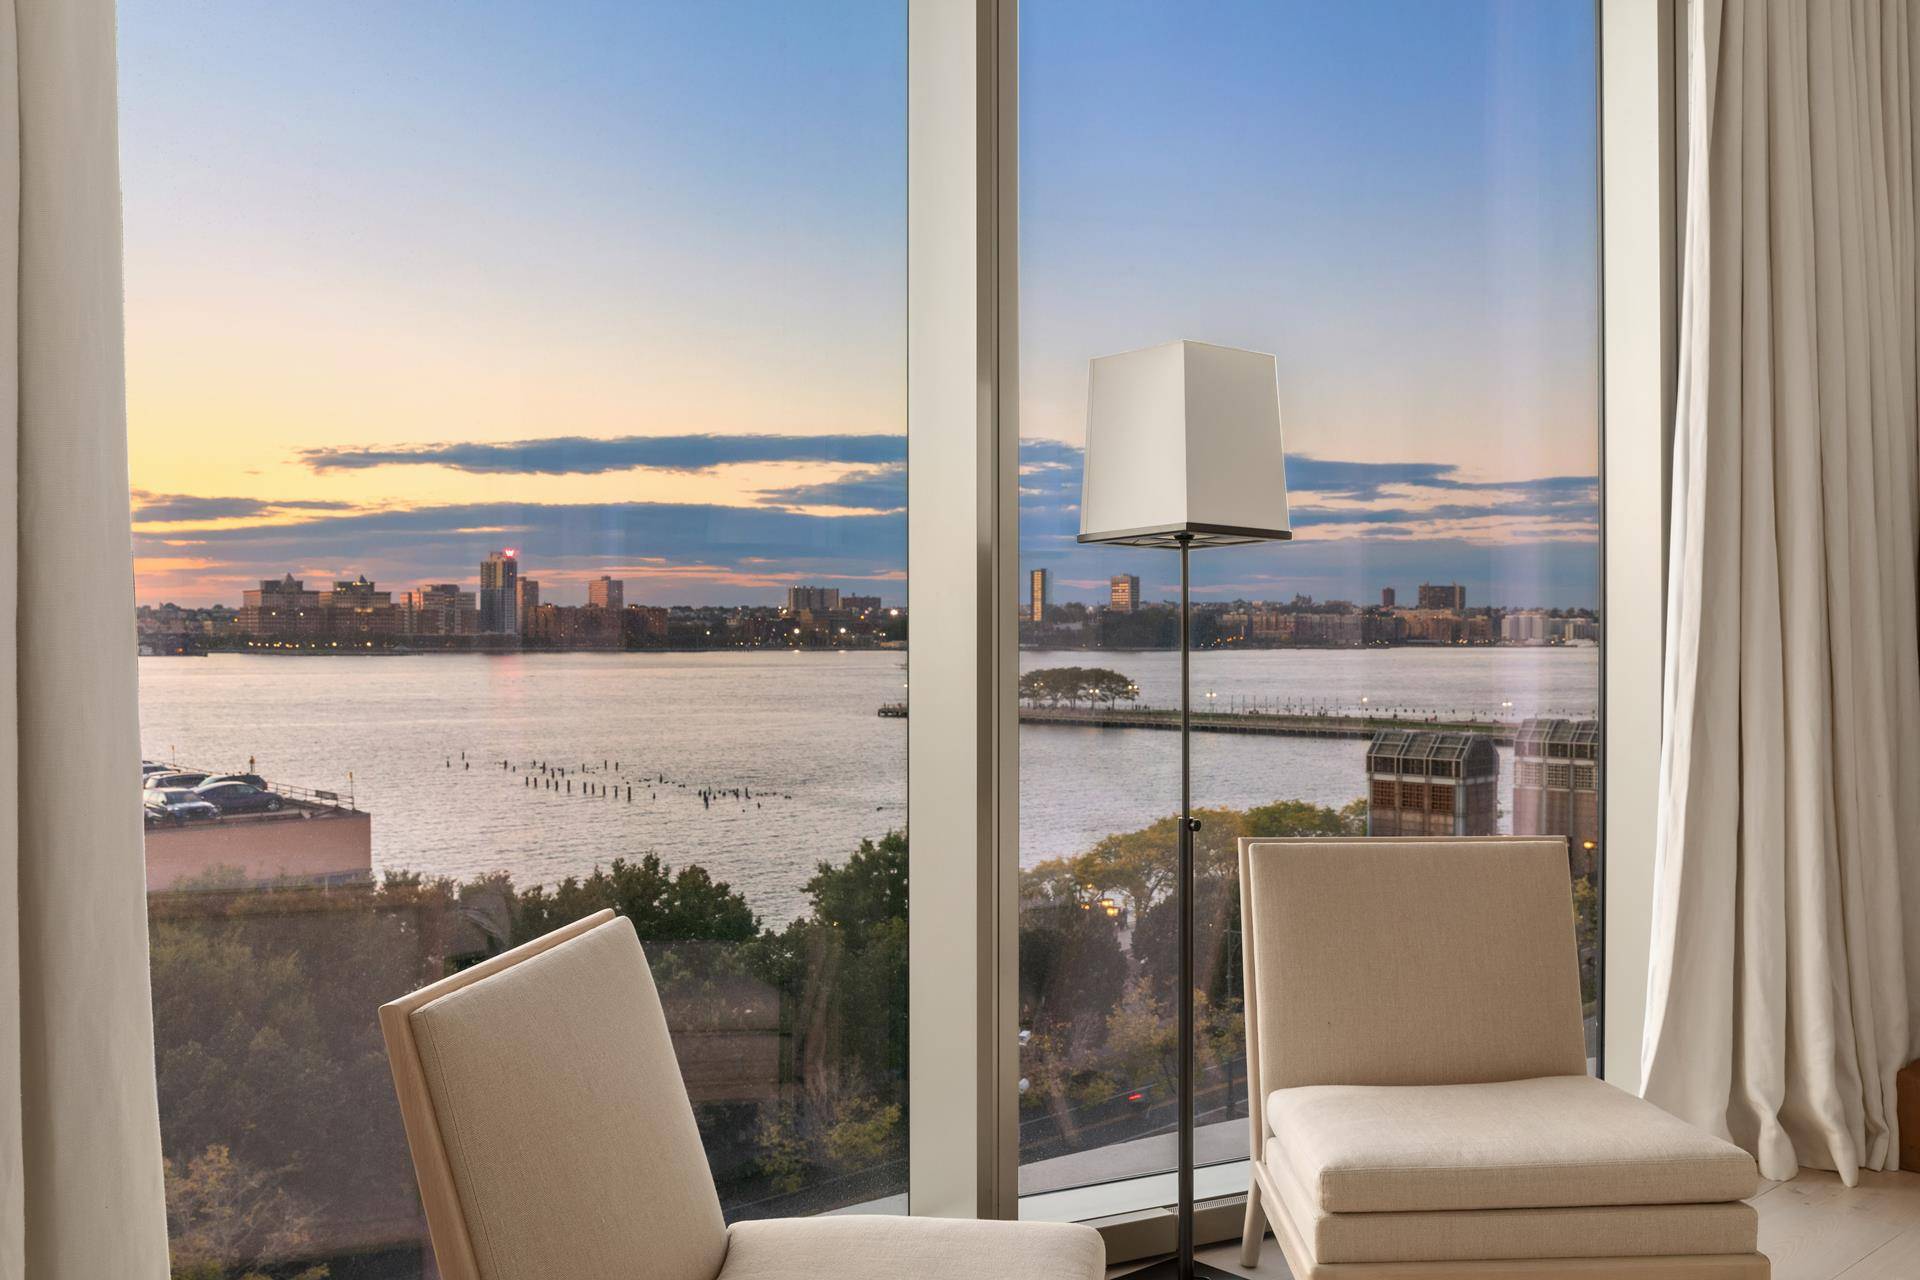 Sweeping panoramic views of the Hudson River and West Village waterfront, Residence South 8 B at 160 Leroy Street features 3 bedrooms, 3.